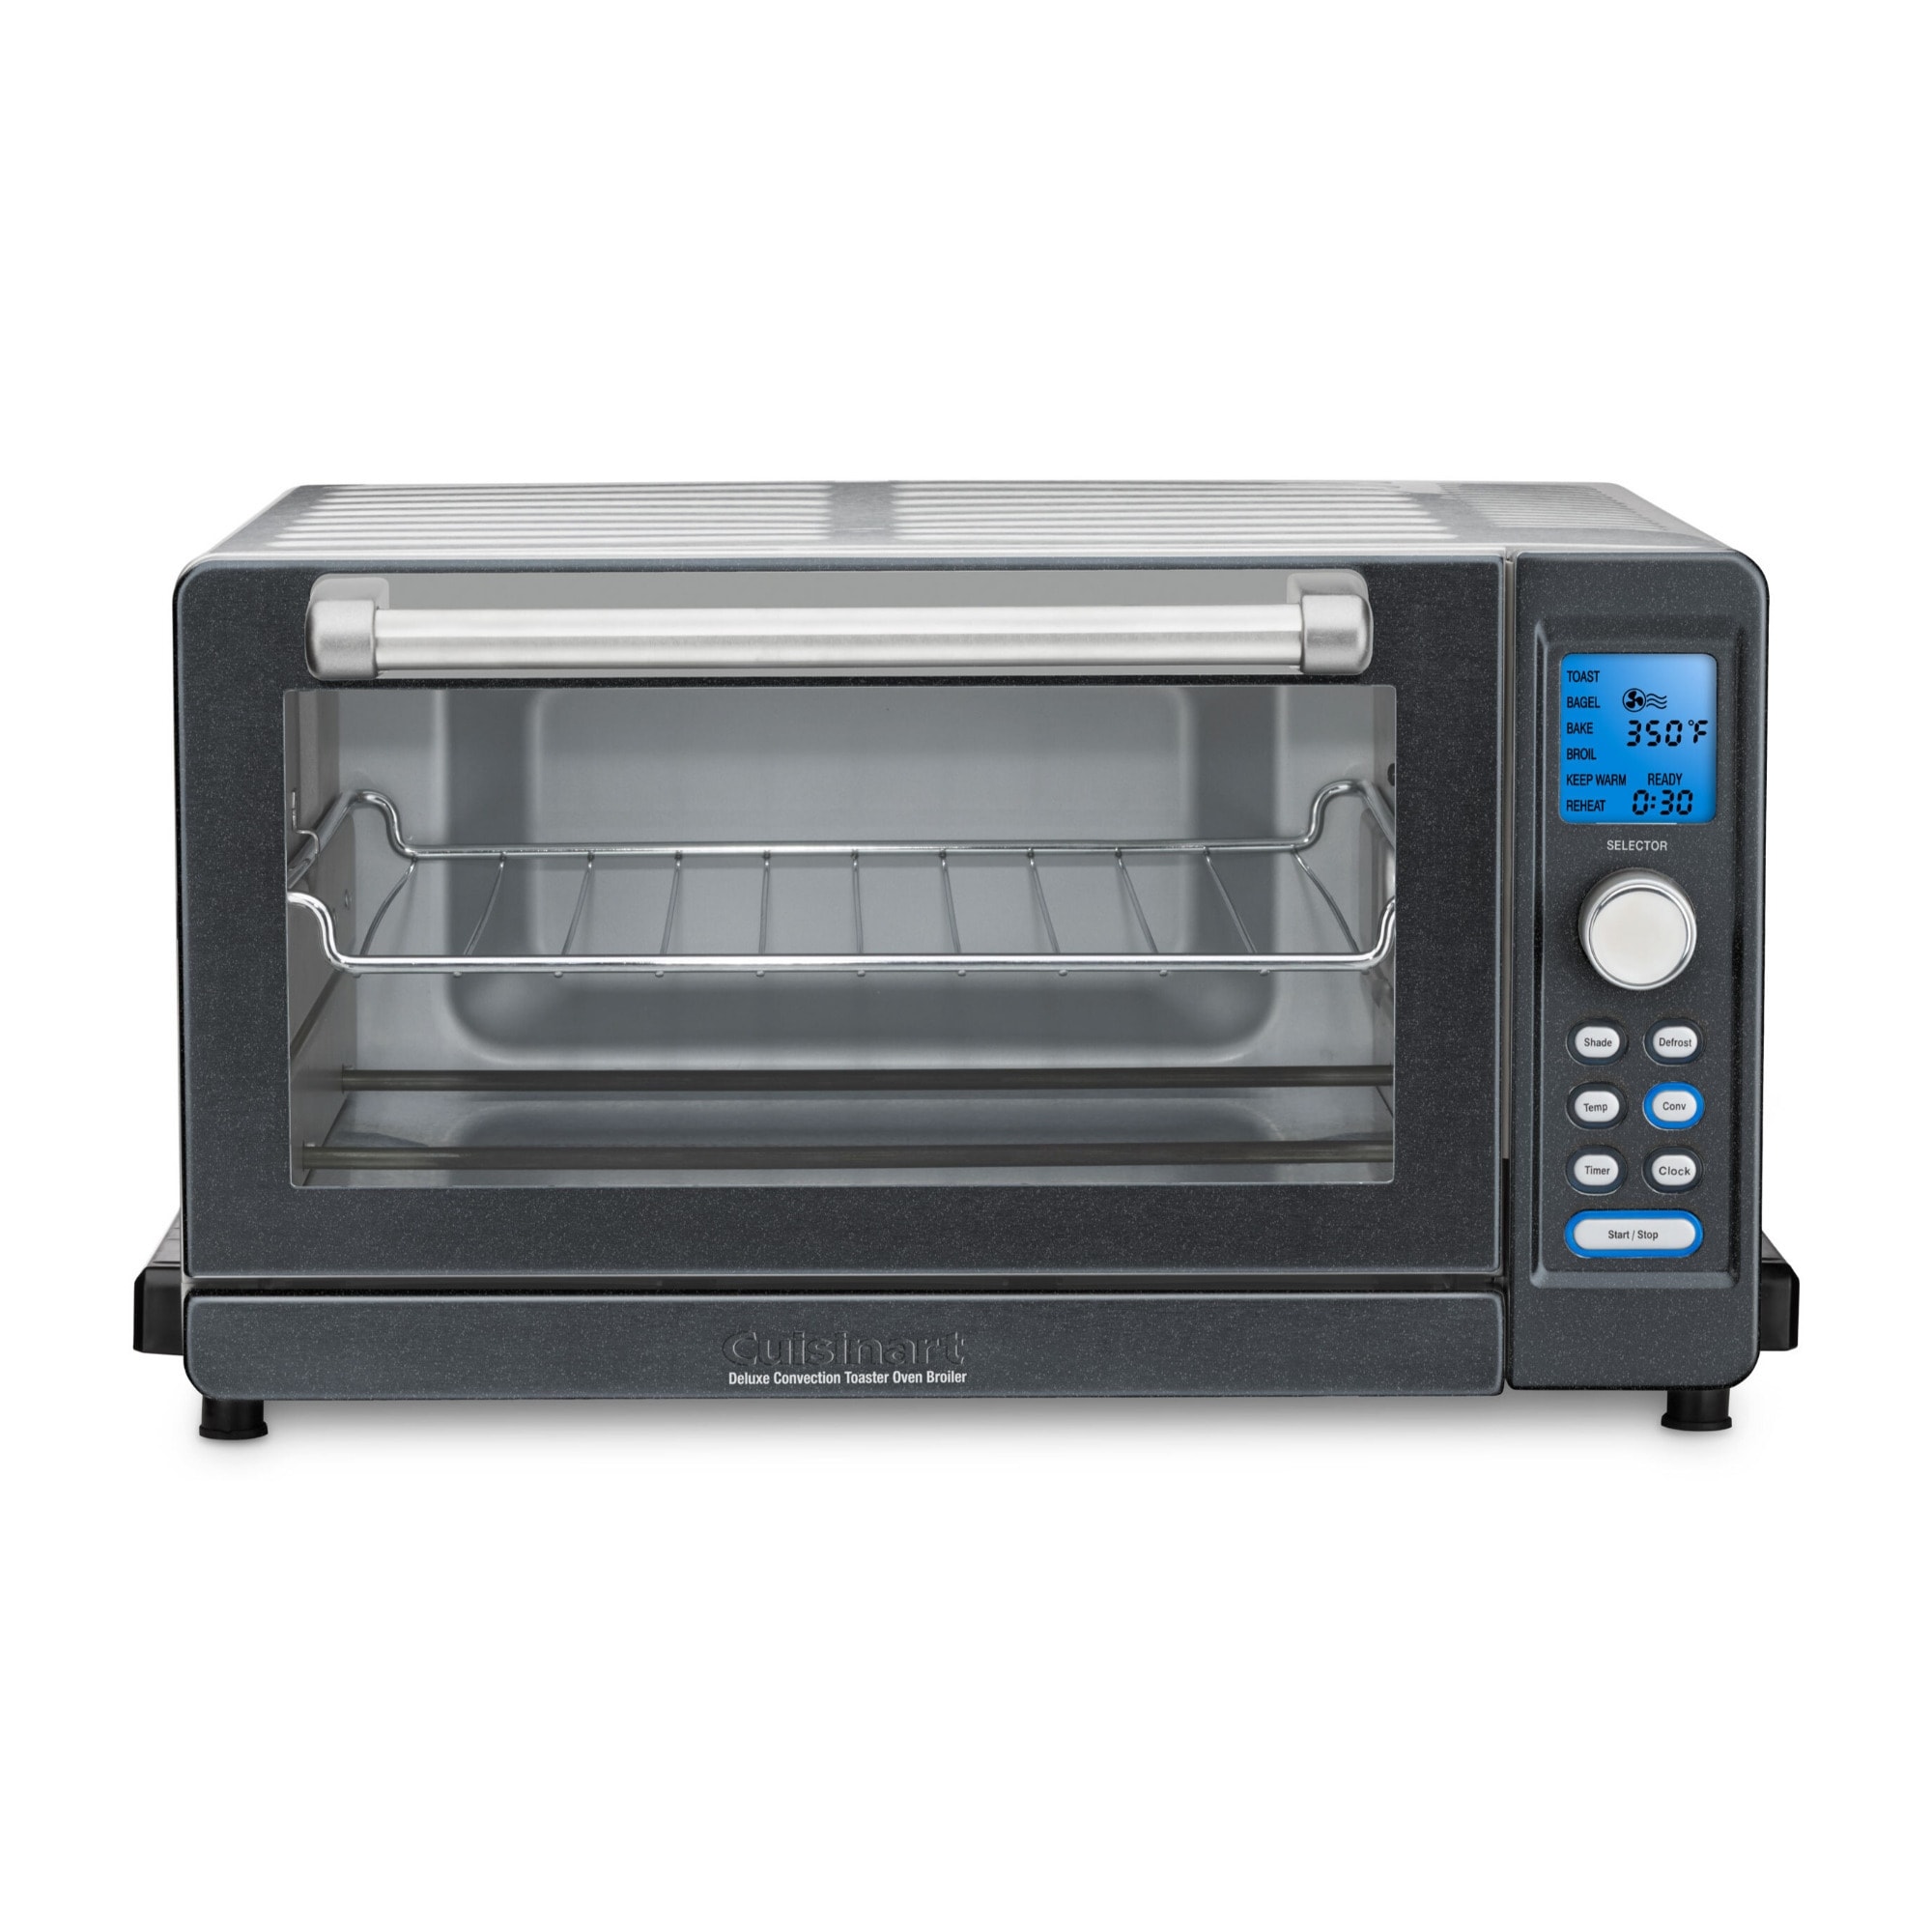 https://ak1.ostkcdn.com/images/products/is/images/direct/0f494dbc1b5b111e20e64484d25645b4313f1acd/Cuisinart-Deluxe-Convection-Toaster-Oven-Broiler-%28Stainless-Steel%29.jpg